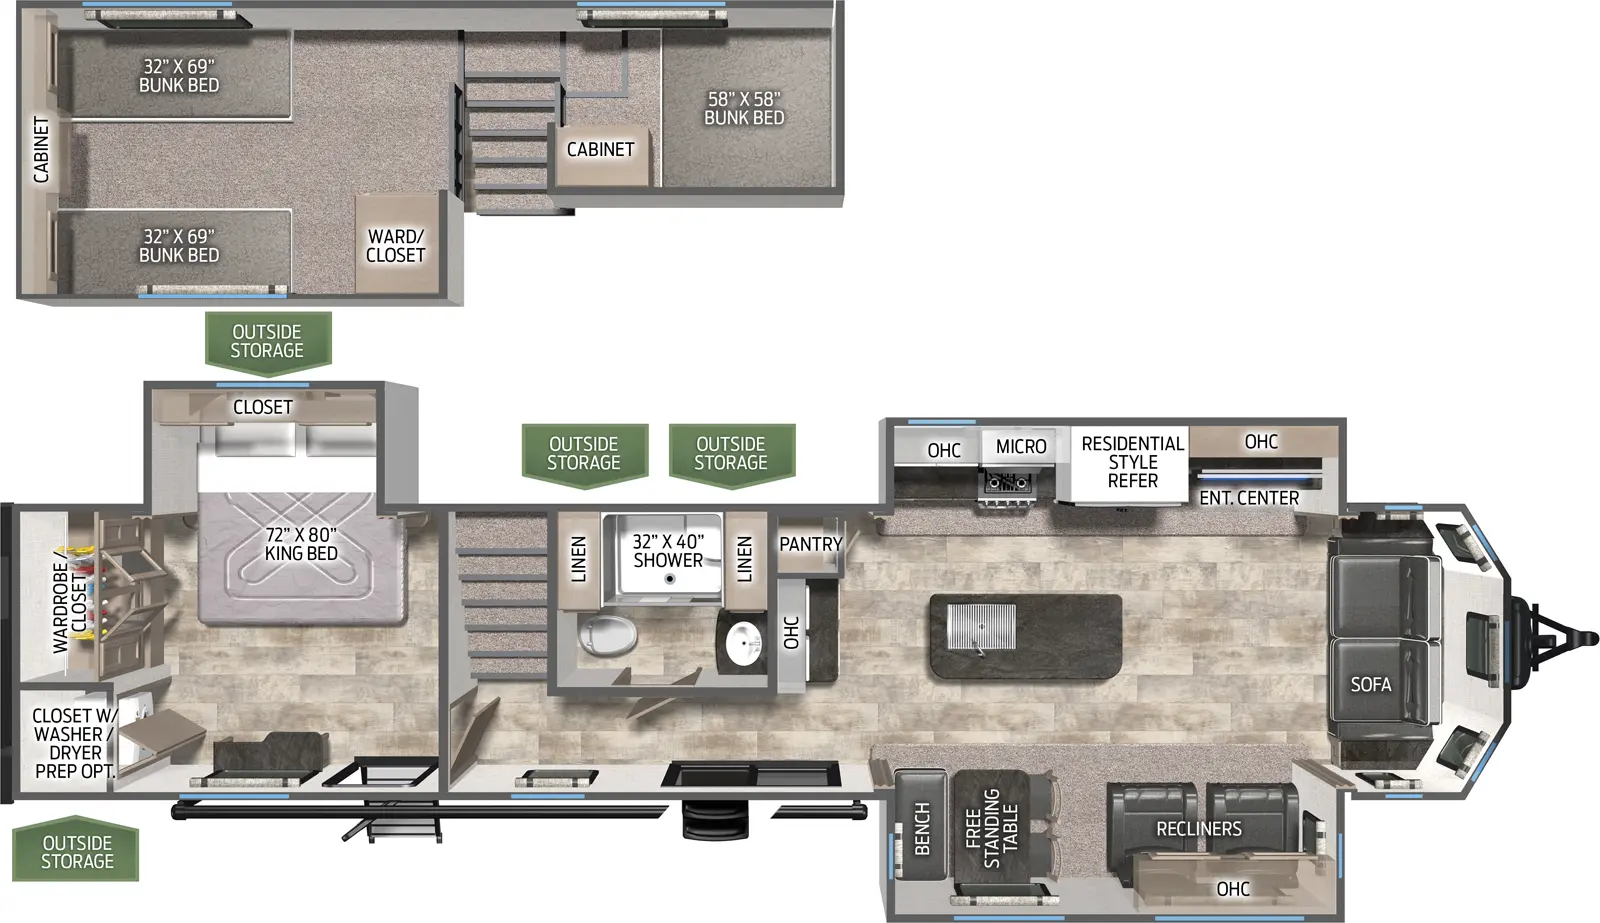 The 402LFT has three slideouts and two entries. Exterior features outside storage. Interior layout front to back: front sofa; off-door side slideout with entertainment center, overhead cabinet, residential style refrigerator, microwave, and cooktop; kitchen island with sink; door side slideout with recliners, overhead cabinet, and free-standing table with chairs and bench; pantry and kitchen counter along inner wall; off-door side full bathroom with linen closets; sliding door entry; stairs to loft area above rear bedroom and bathroom with three bunk mats, cabinets and wardrobe/closet; rear bedroom with off-door side king bed slideout with overhead cabinet, second entry, and rear wardrobe and closet with washer/dryer prep.